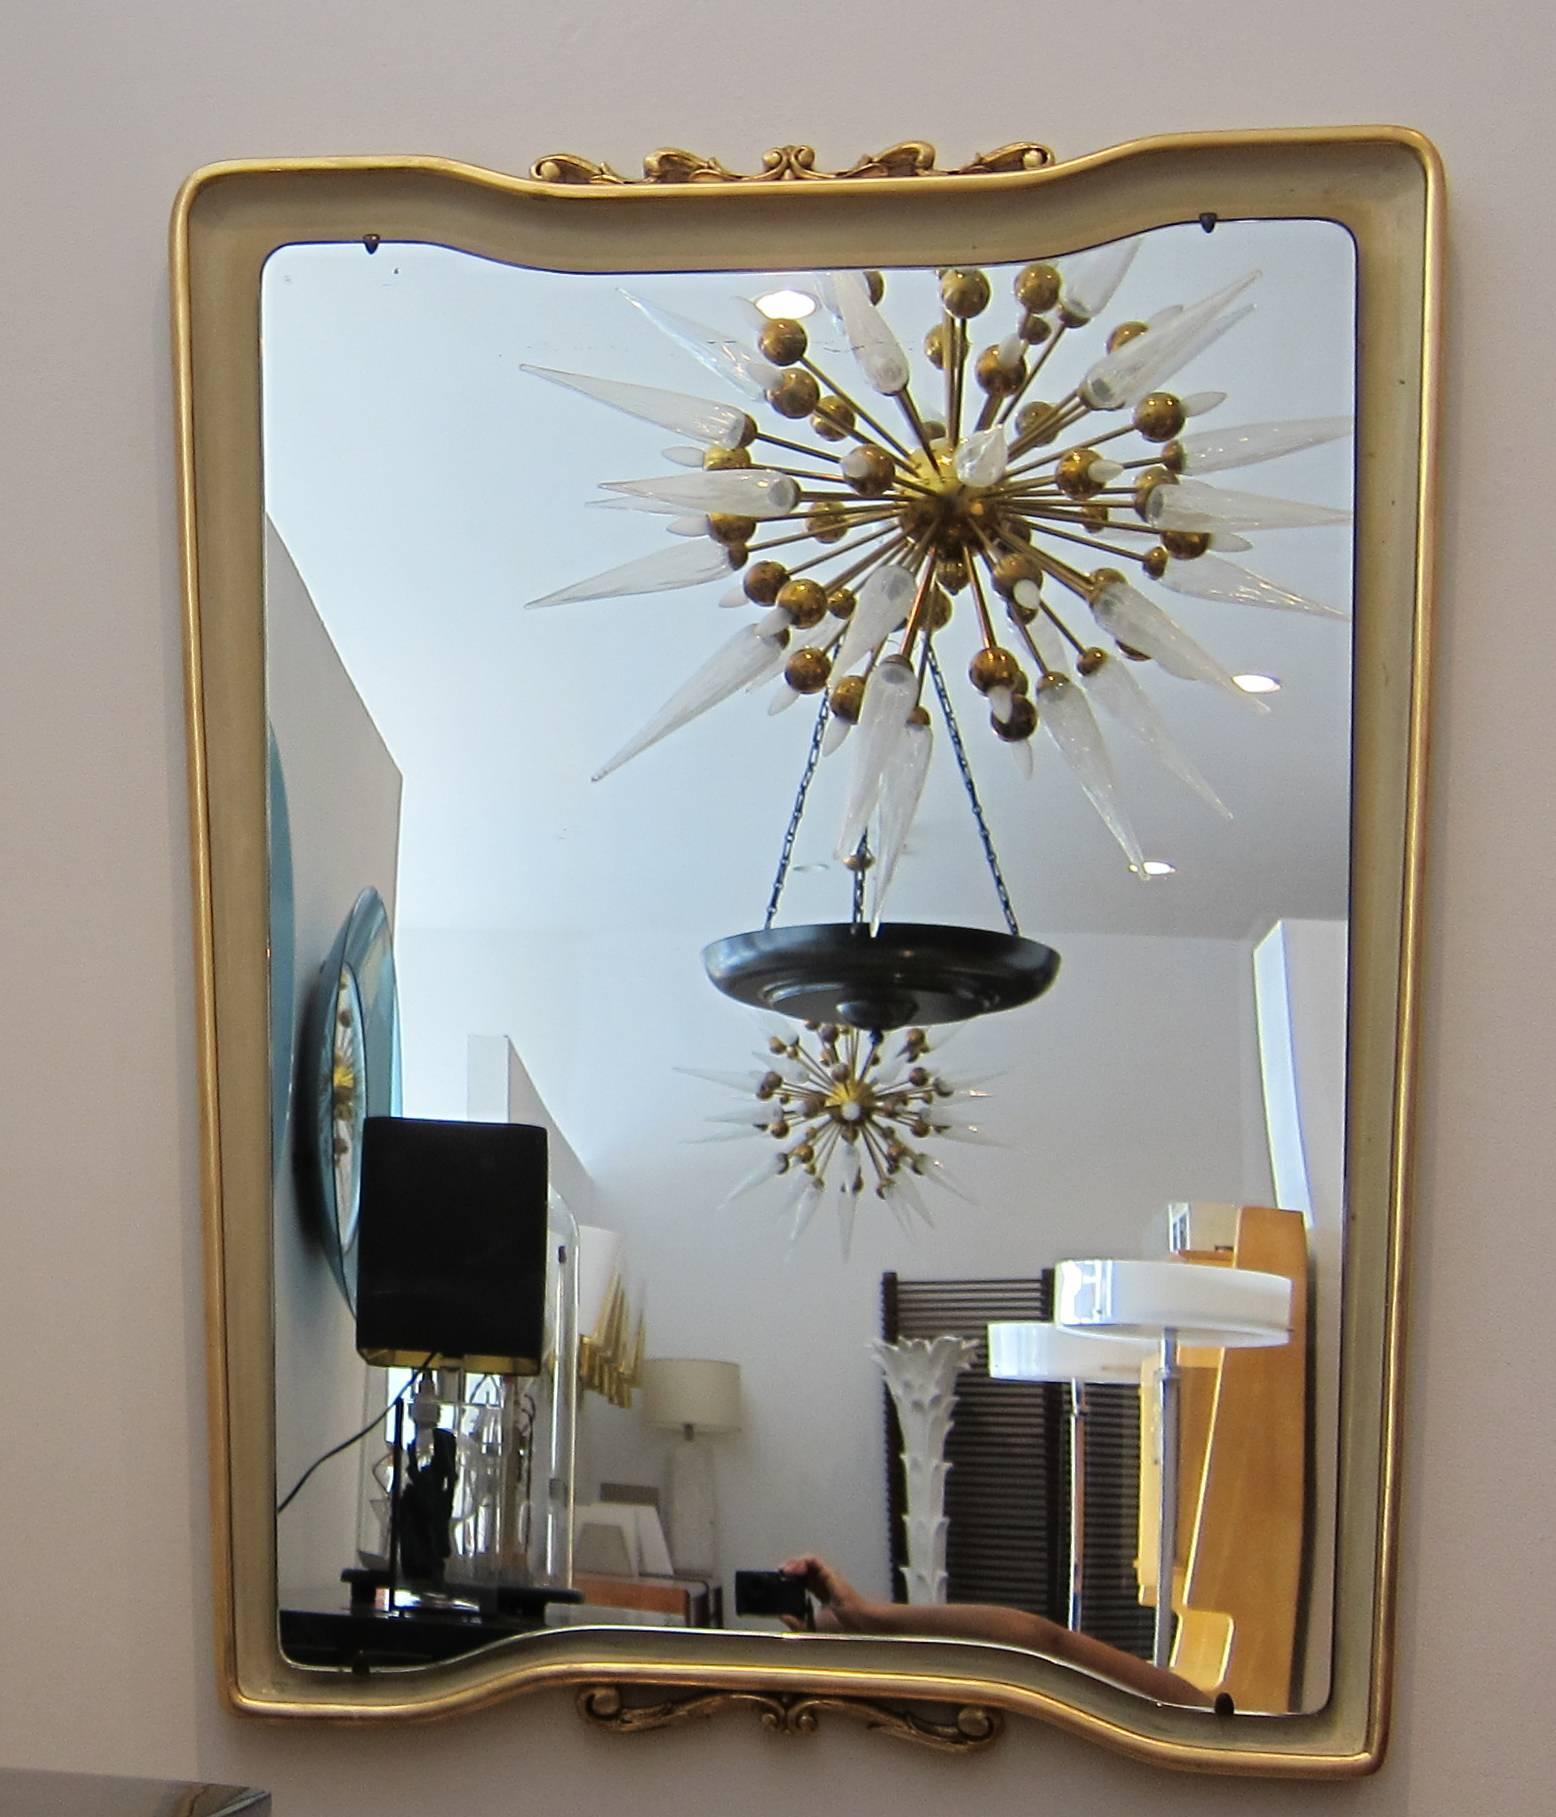 Italian 1950s large parcel gilt wood frame mirror by Osvaldo Borsani.
Excellent original condition with minor wear consistent with age and use preserving a beautiful patina.